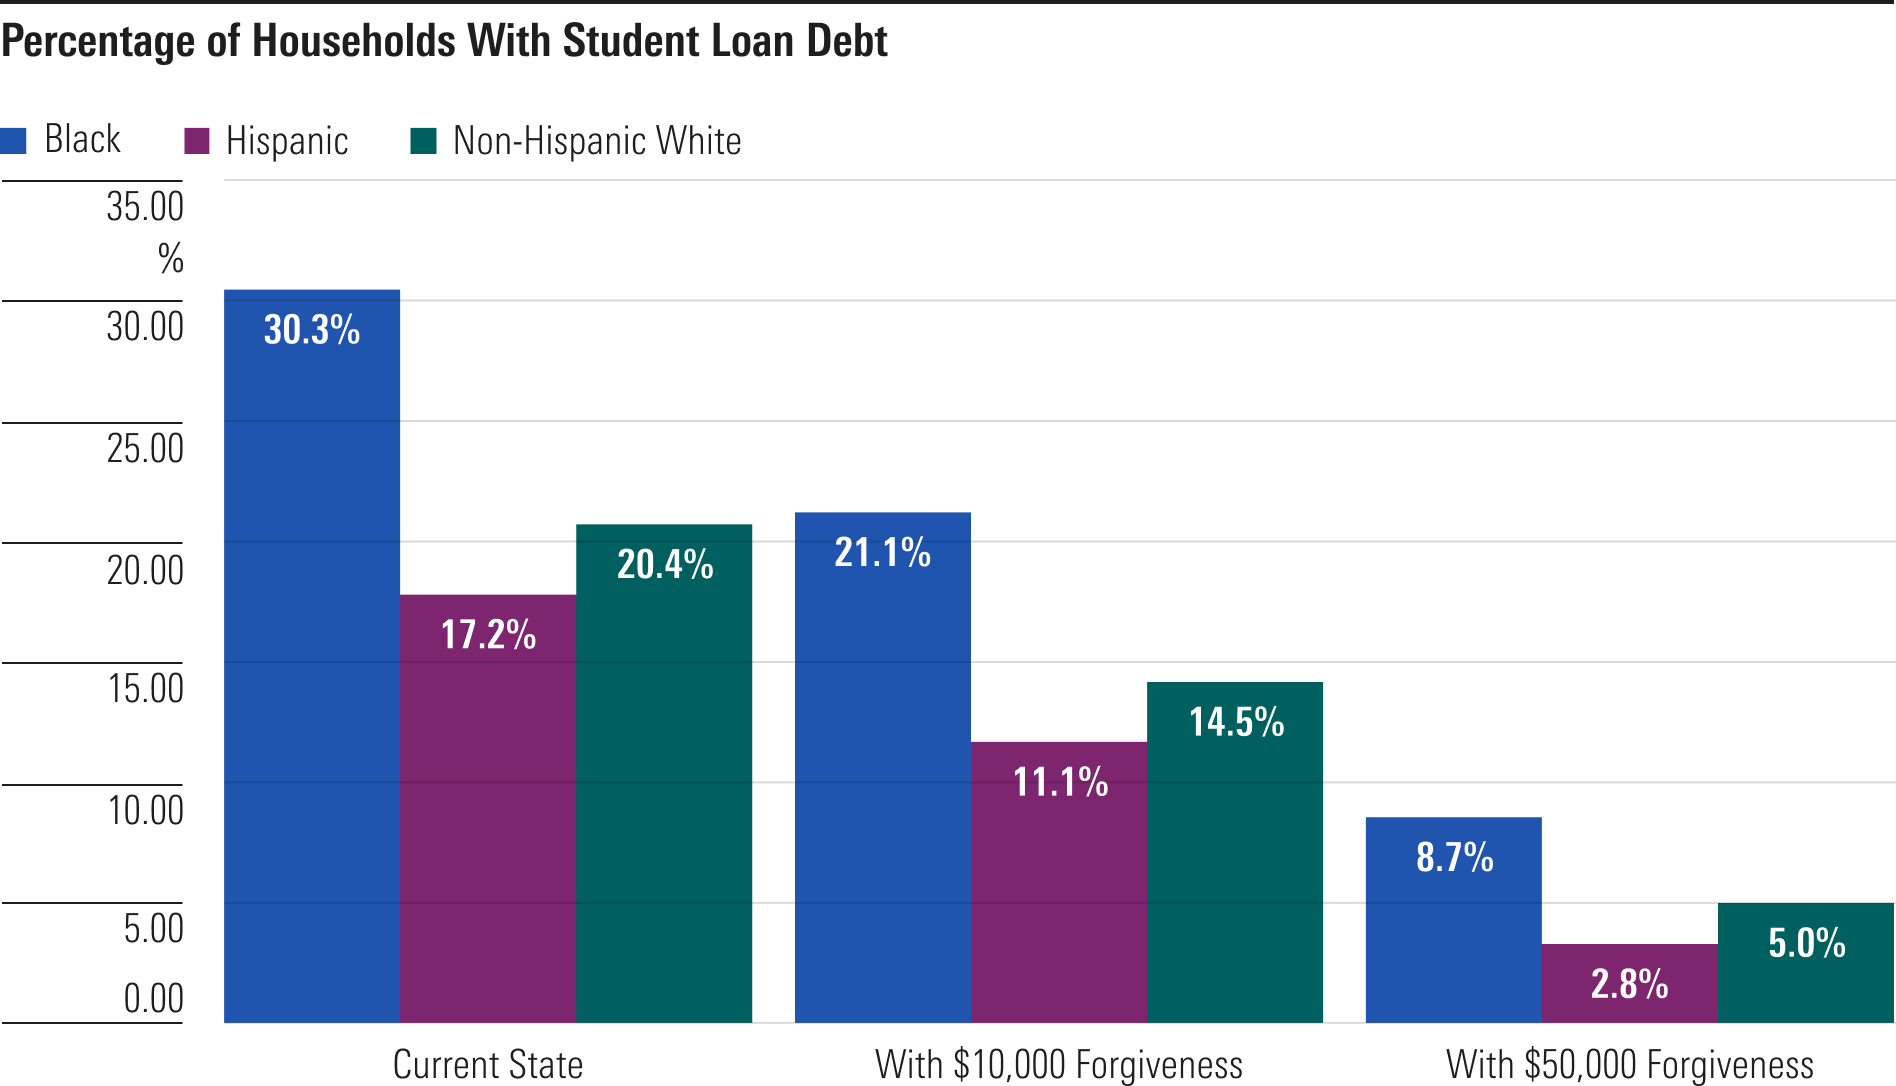 A bar graph shows that Black households have the highest percentage of student loan debt, followed by Non-Hispanic White households and Hispanic households. The chart then goes to show how student loan forgiveness would impact each.